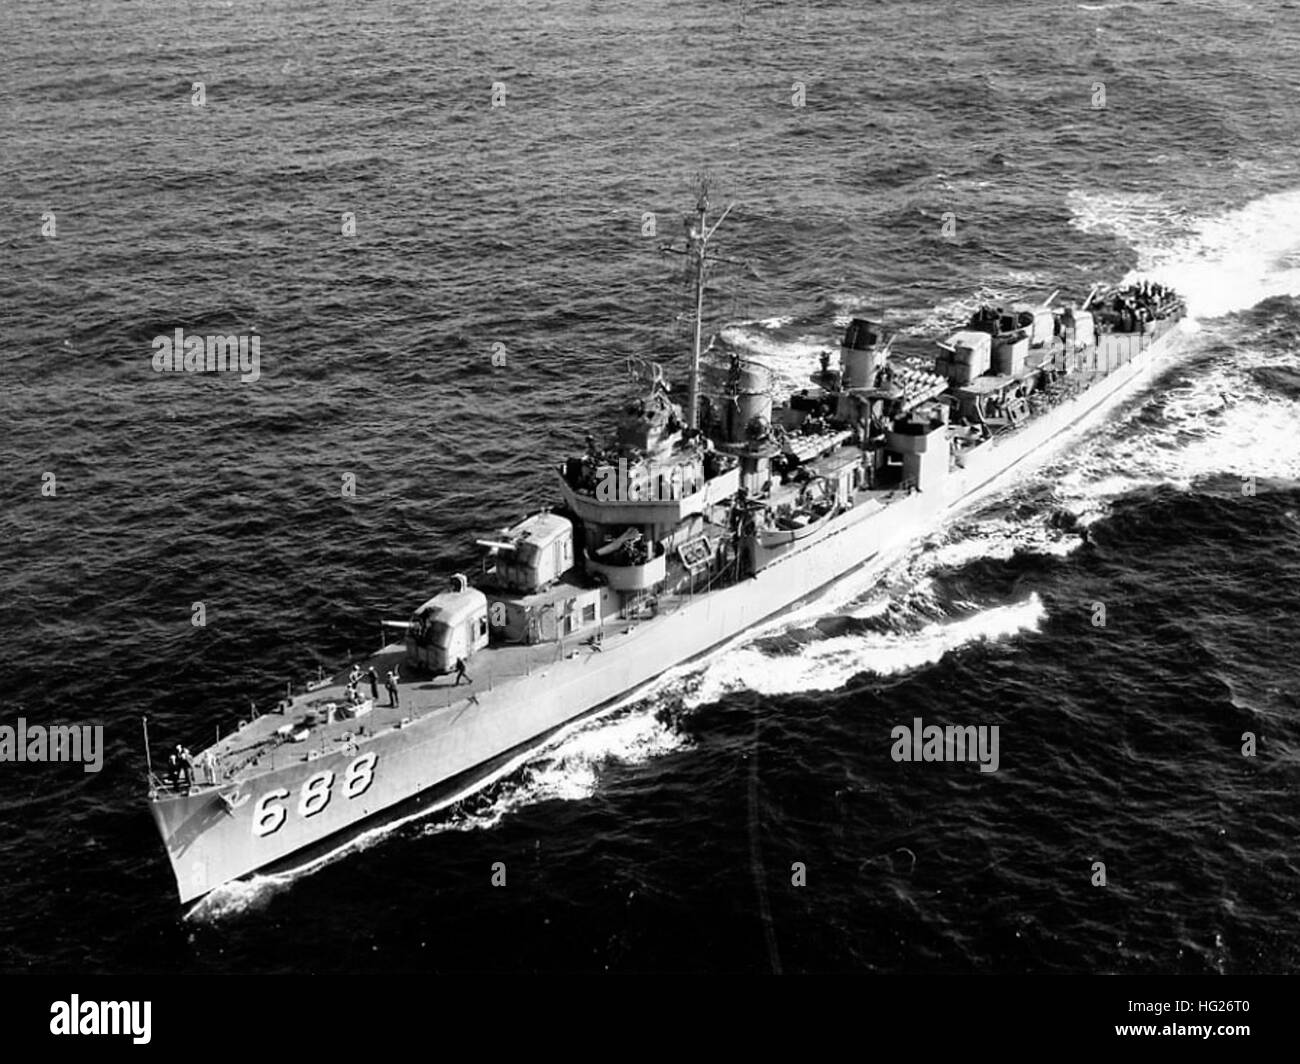 USS Remey (DD-688) underway at sea, probably in late 1951 or early 1952, soon after she was recommissioned during the Korean War build up. Note that she still has a pole mast, World War II era radars, all ten 21-inch torpedo tubes, twin 40mm gun mounts just forward of her bridge and 20mm guns on her fantail. This photograph was received by the Naval Photographic Center in December 1959, but was actually taken several years earlier.  Official U.S. Navy Photograph, from the collections of the Naval History and Heritage Command. USS Remey (DD-688) at sea c1951 Stock Photo